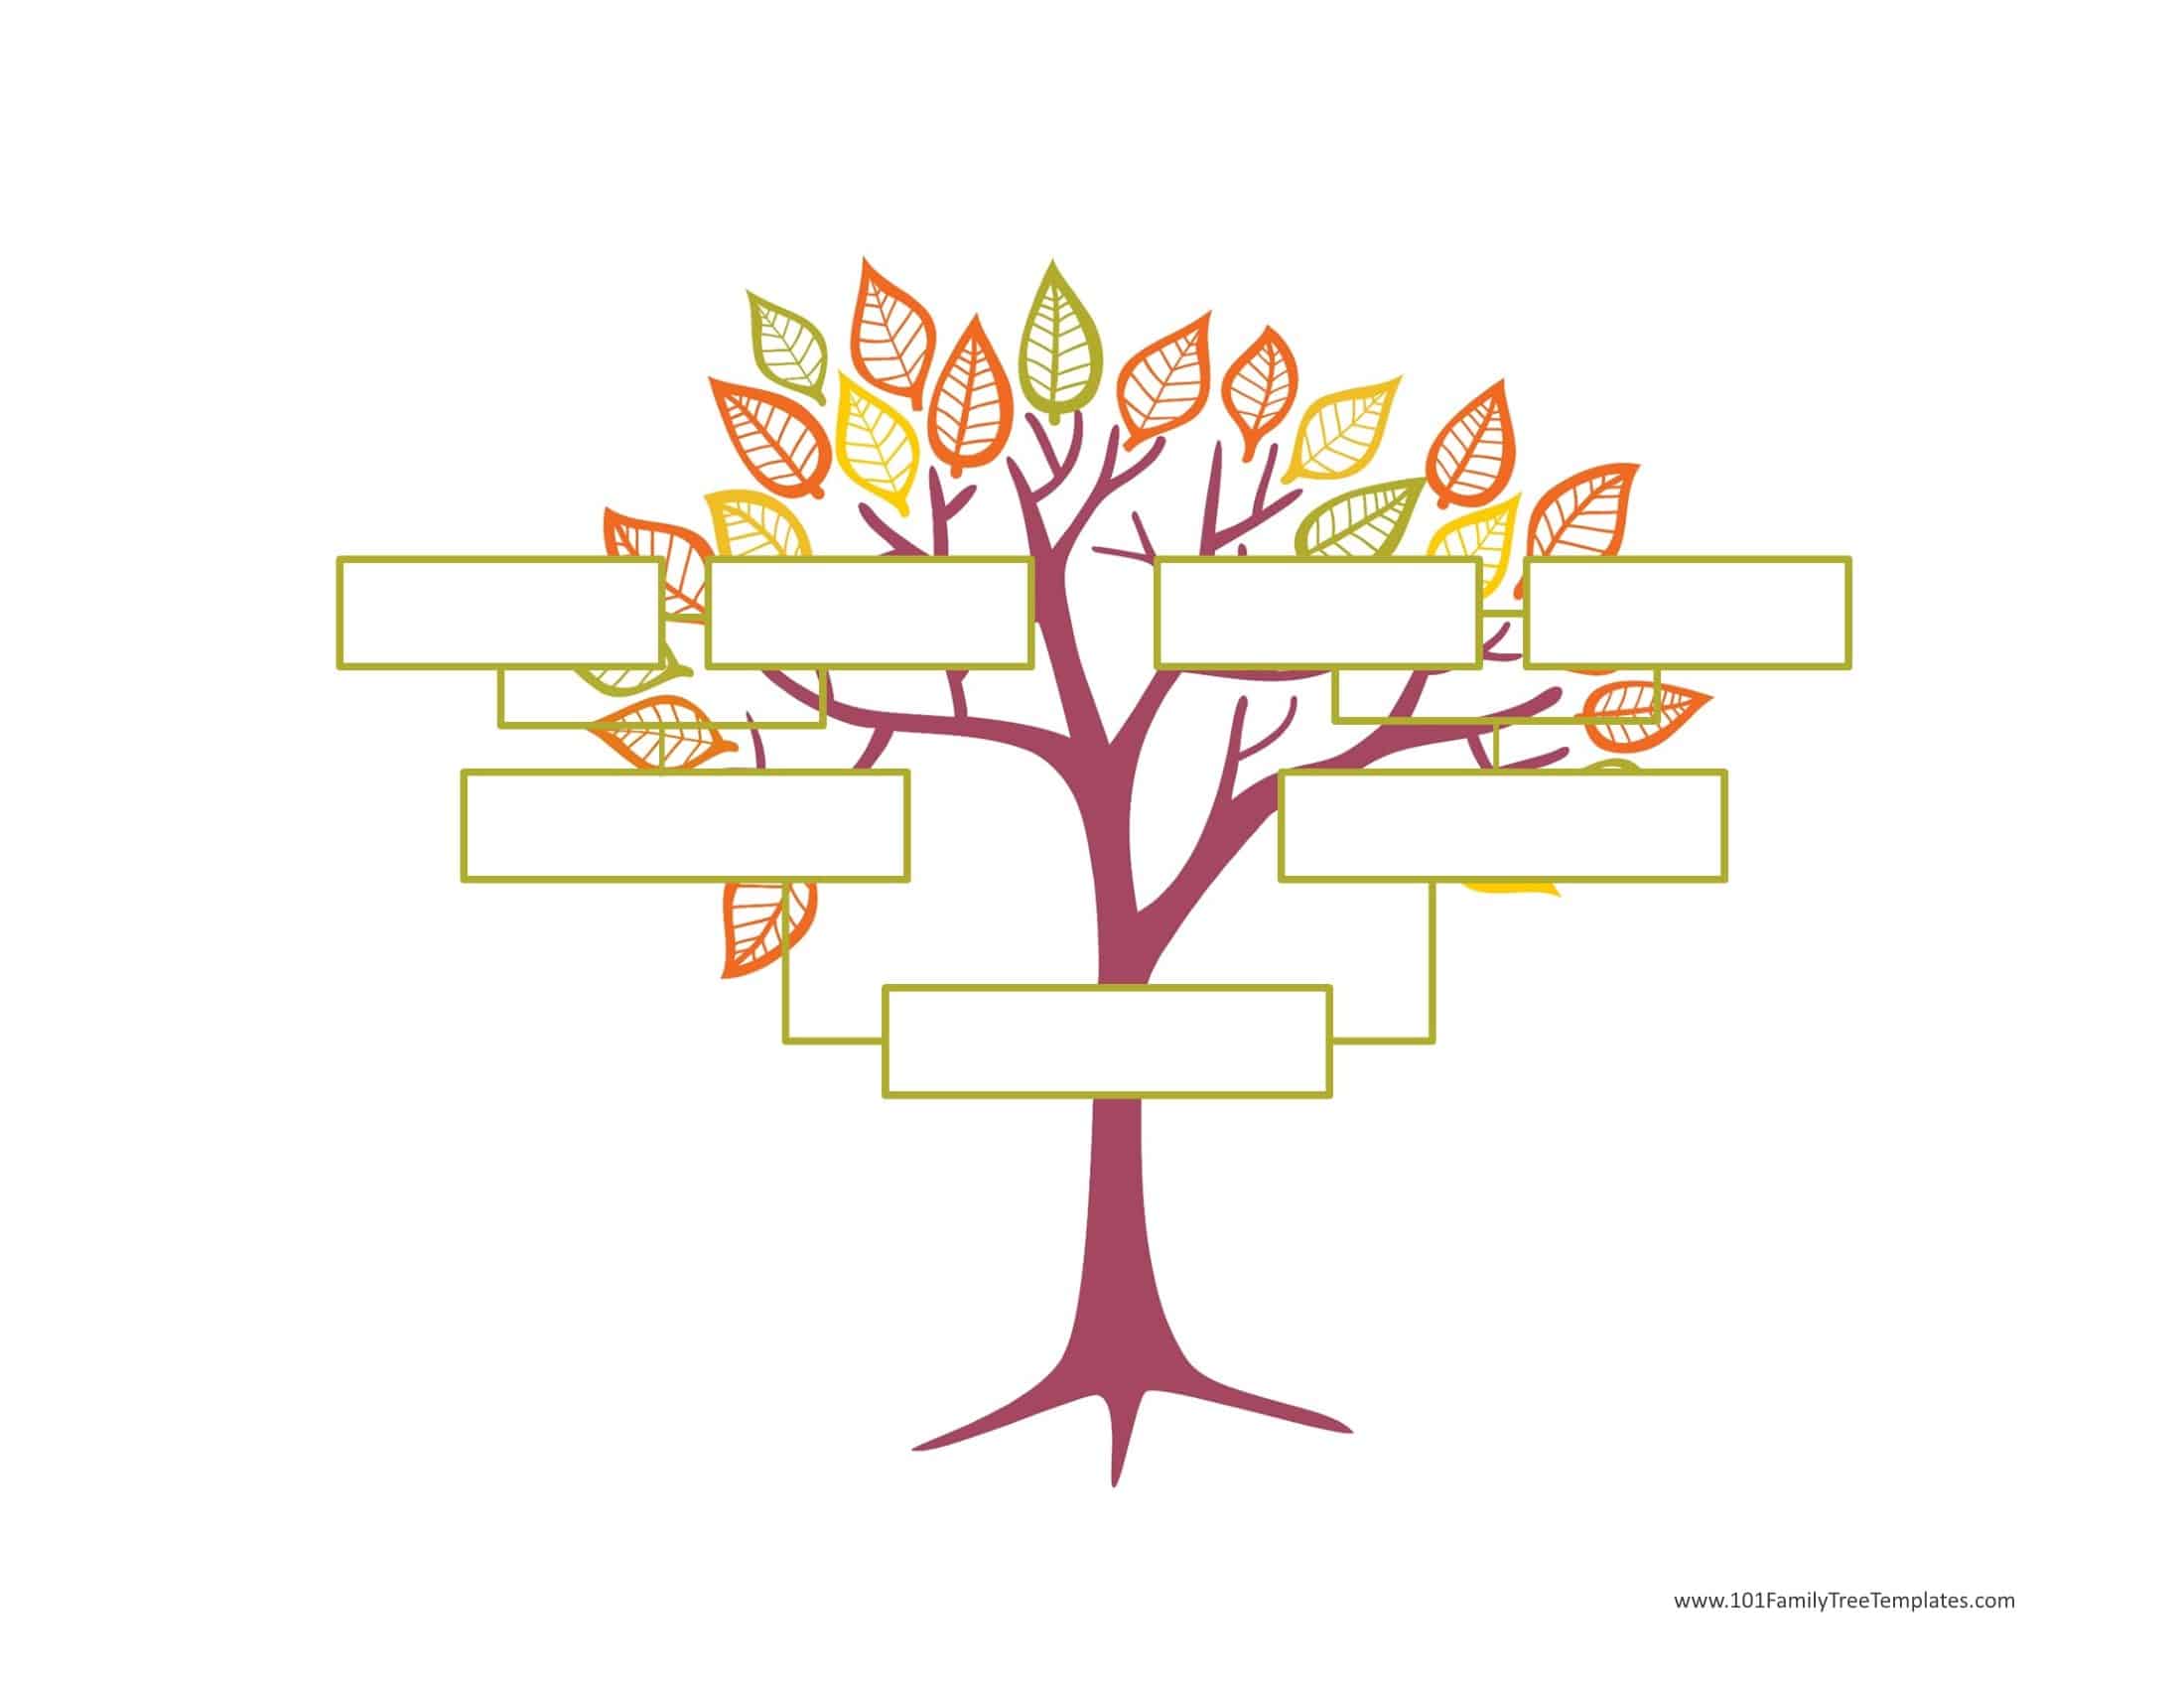 Blank Family Tree Template | Free Instant Download